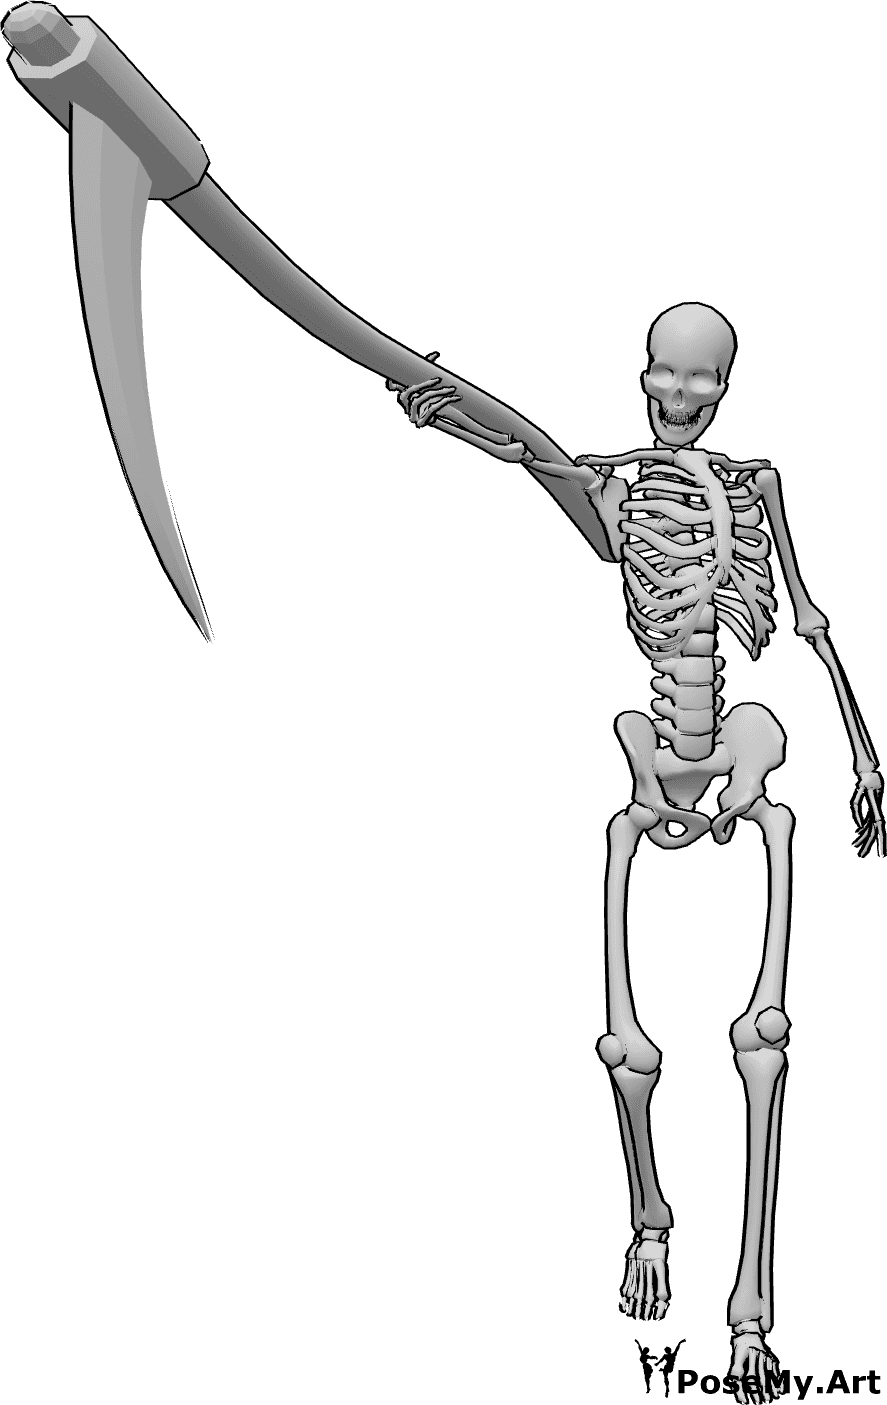 Pose Reference - Skeleton scythe pointing gpose - Skeleton is standing and pointing with his scythe in his right hand